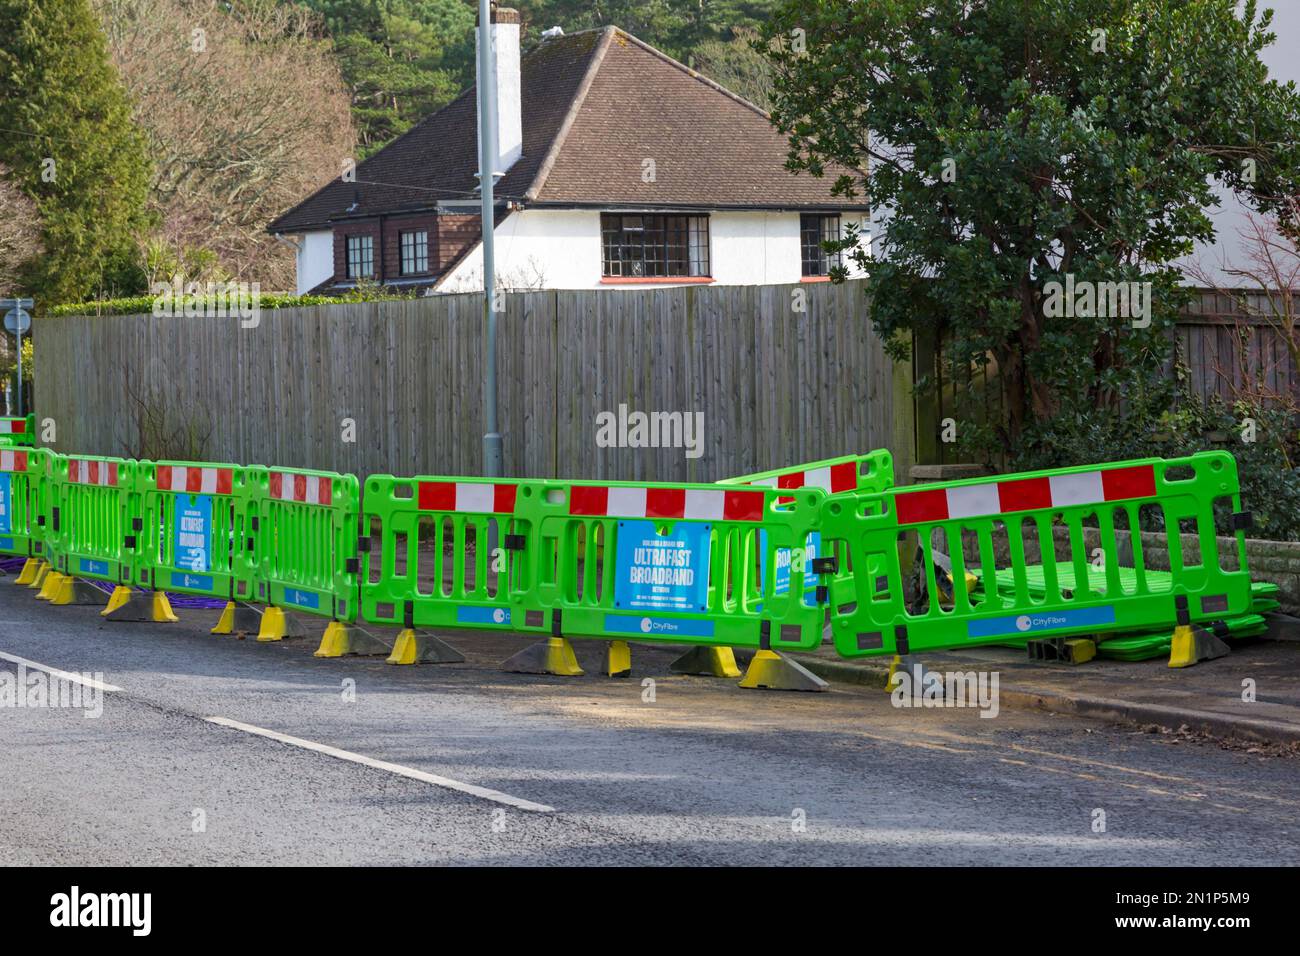 Work being undertaken by City Fibre to install a brand new ultrafast broadband network in the area at Poole, Dorset UK in February Stock Photo